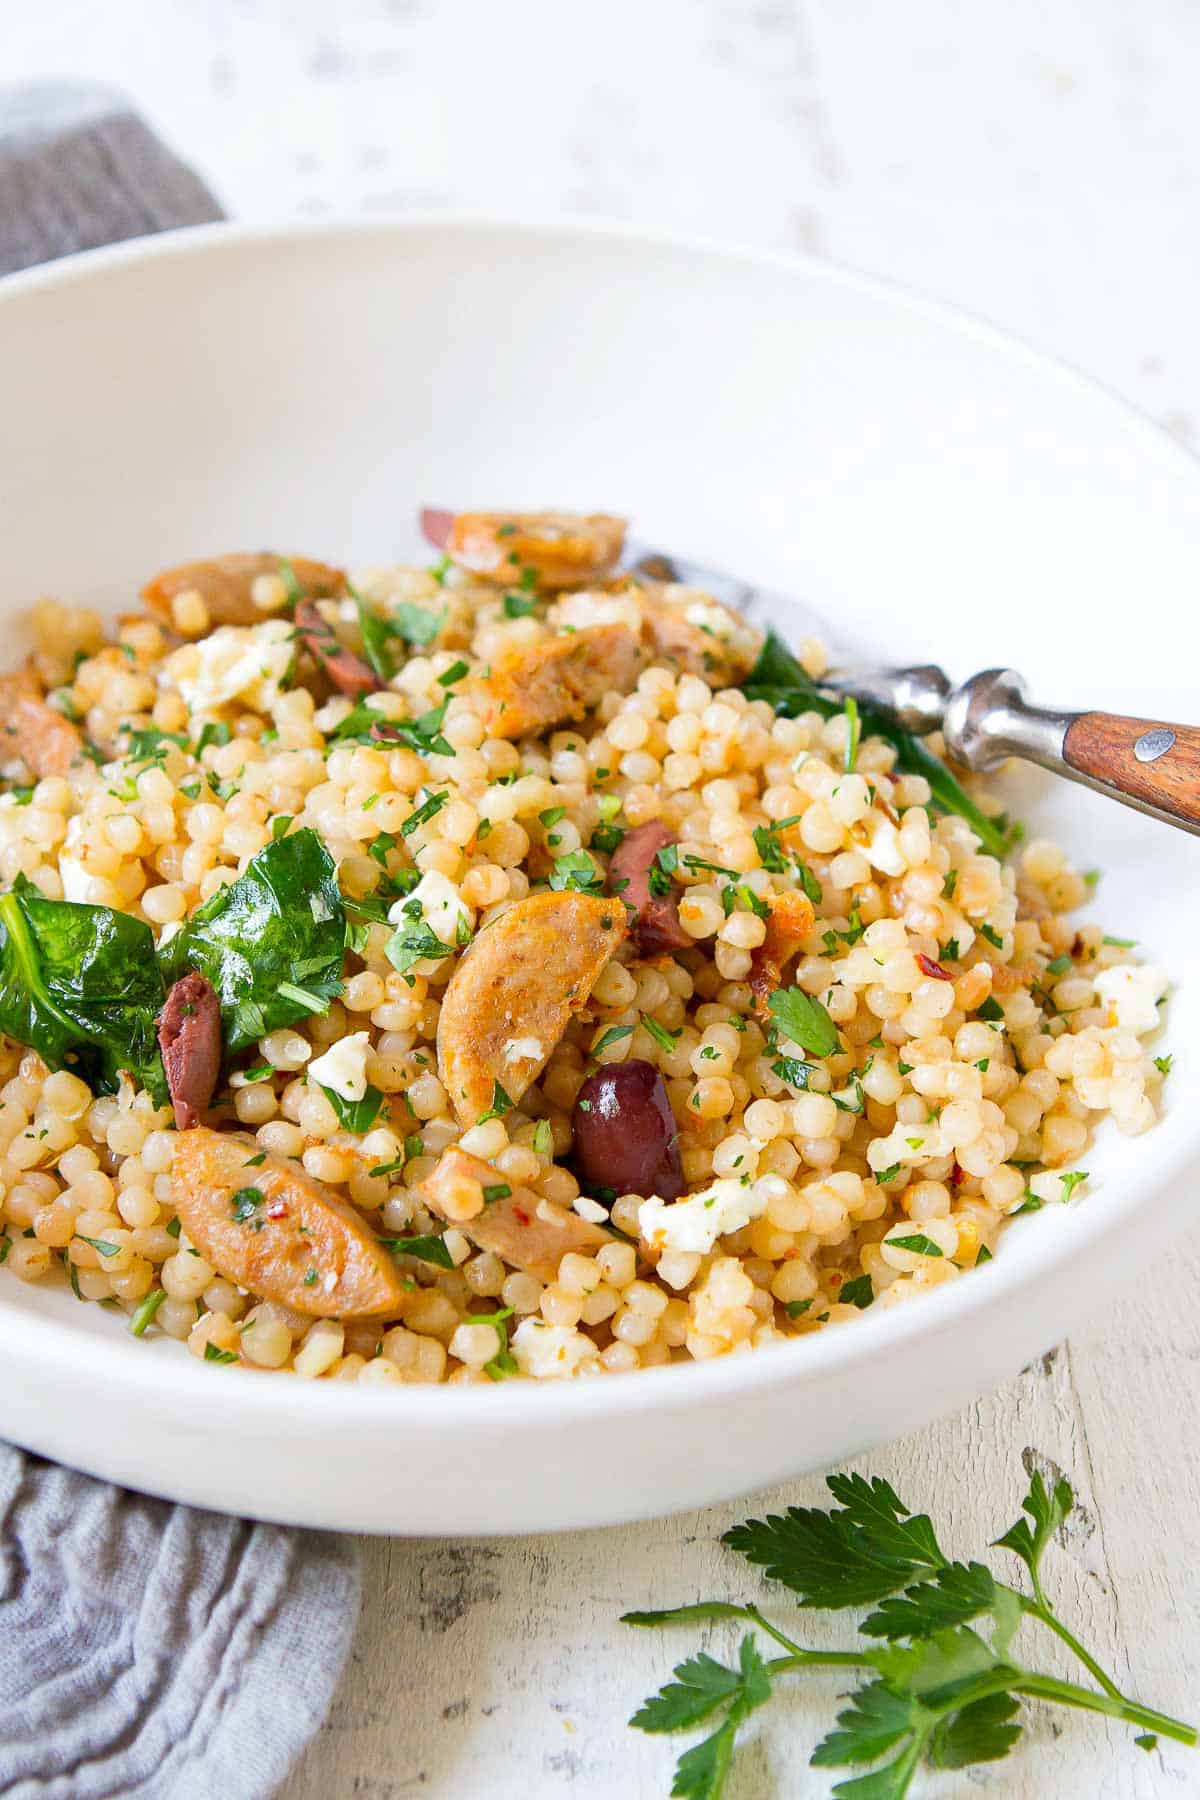 Israeli couscous, cooked sausage, spinach, olives and feta in a white bowl.